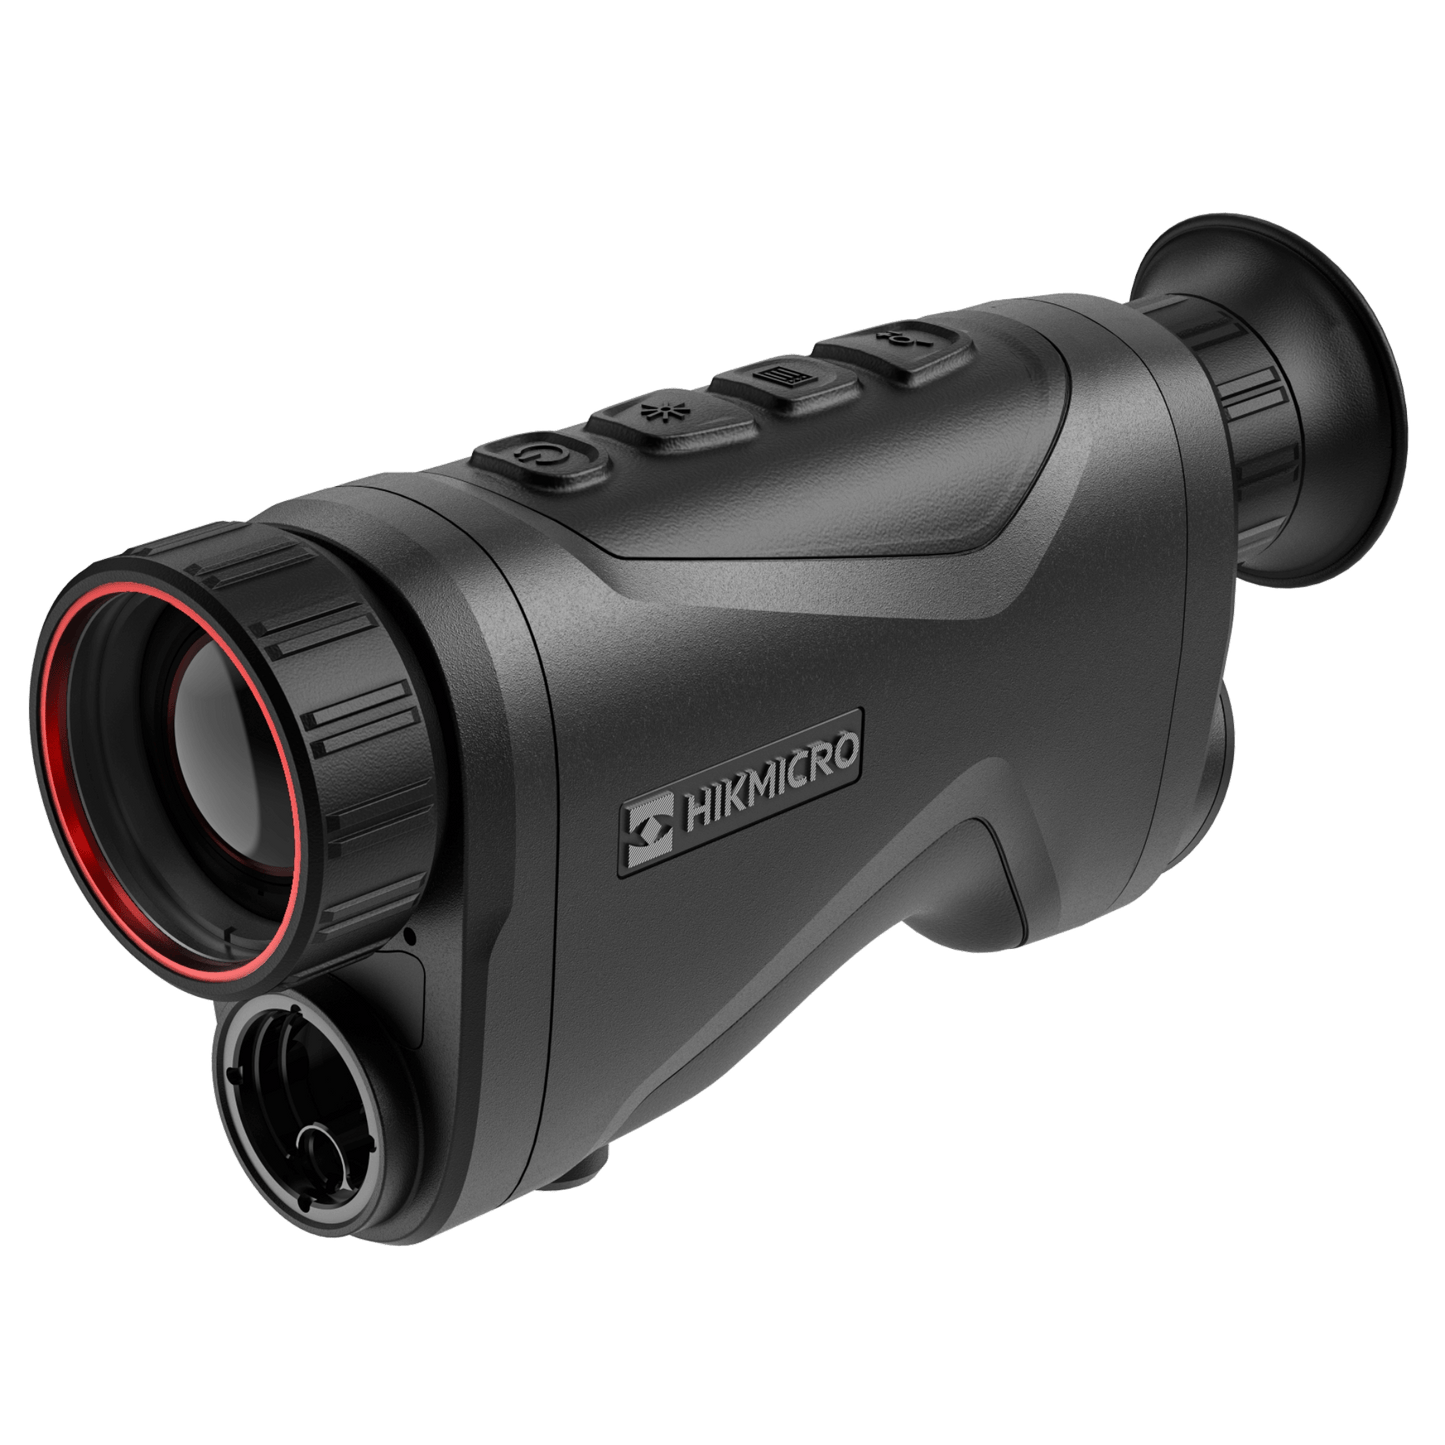 Front view of the HikMicro Condor CQ35L thermal monocular with laser rangefinder, highlighting the prominent germanium lens circled in red and the adjacent laser rangefinder. The sleek black design contrasts with the silver HikMicro logo, and tactile buttons are visible on top.